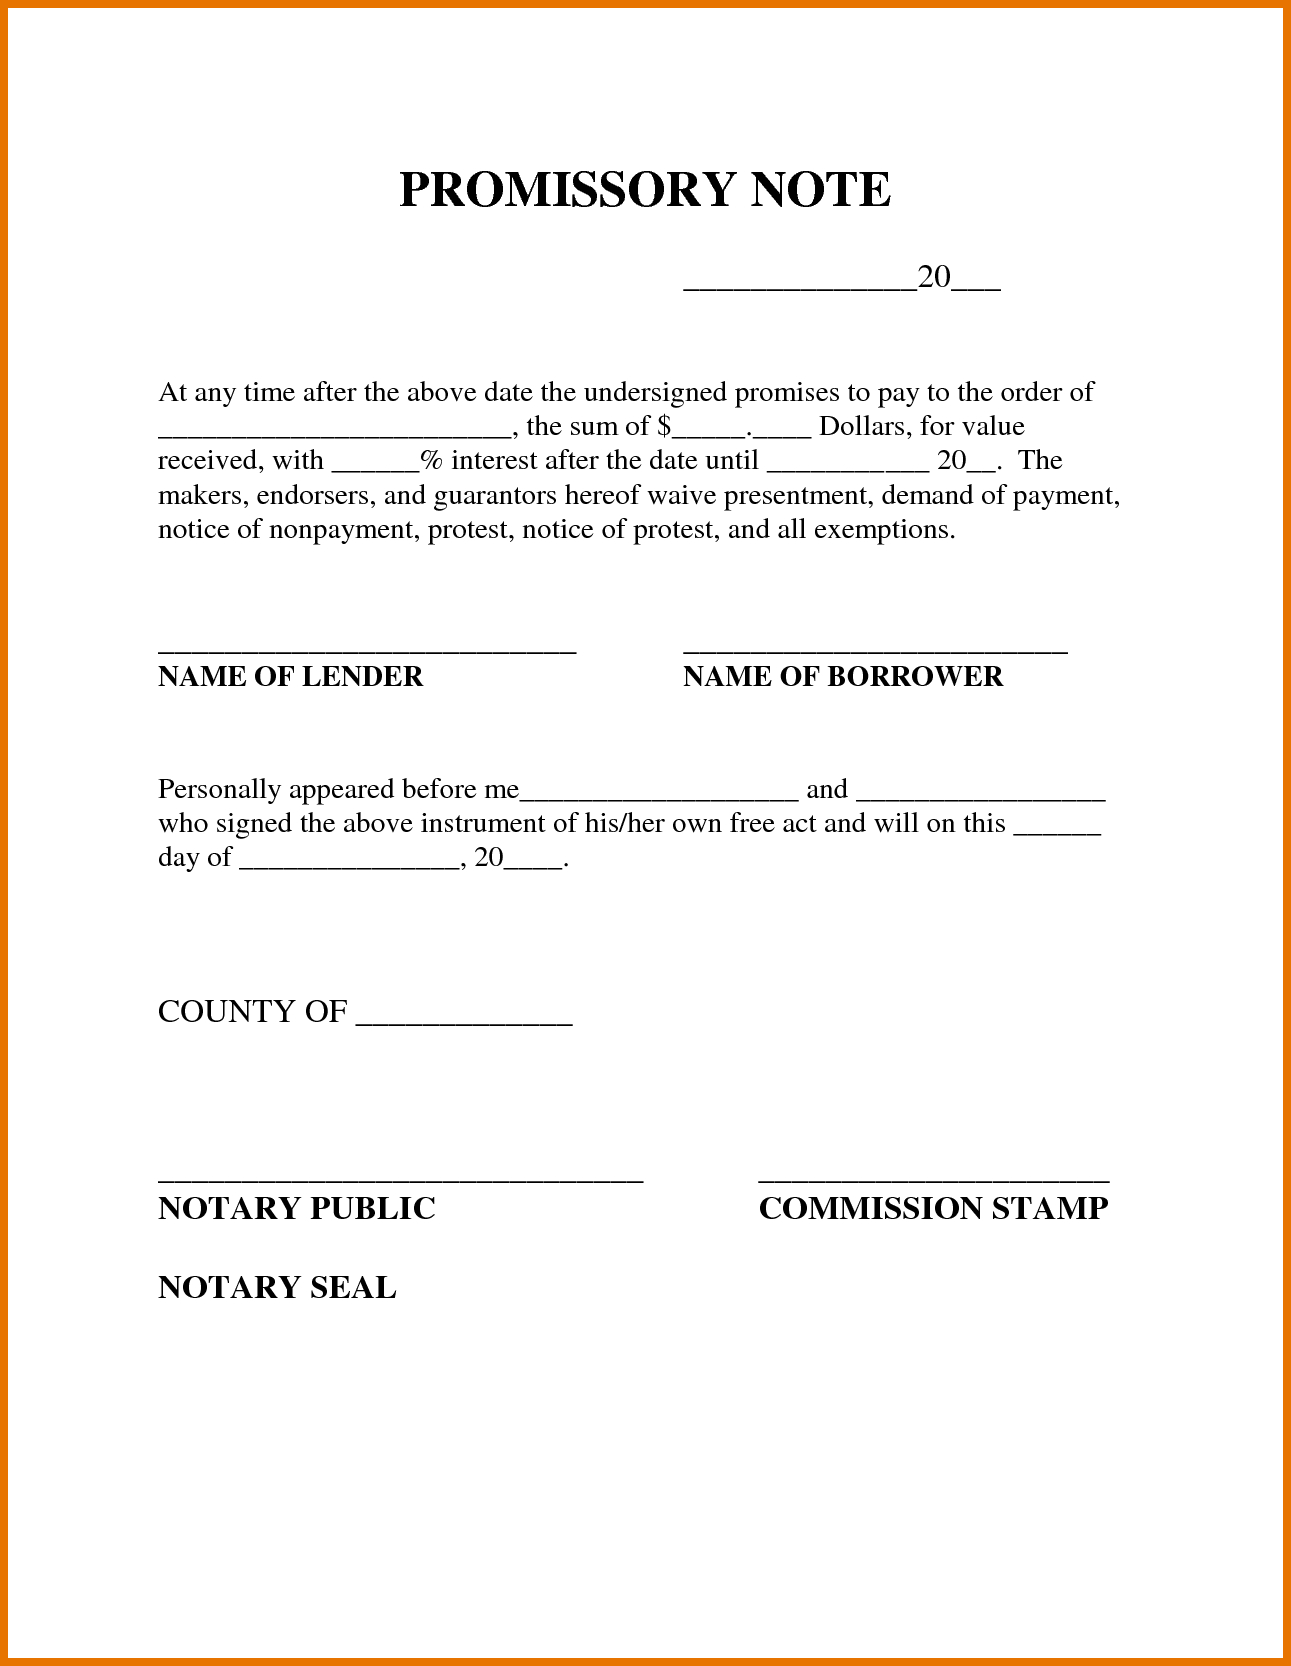 Free Printable Promissory Note Template : Violeet - Free Printable Promissory Note